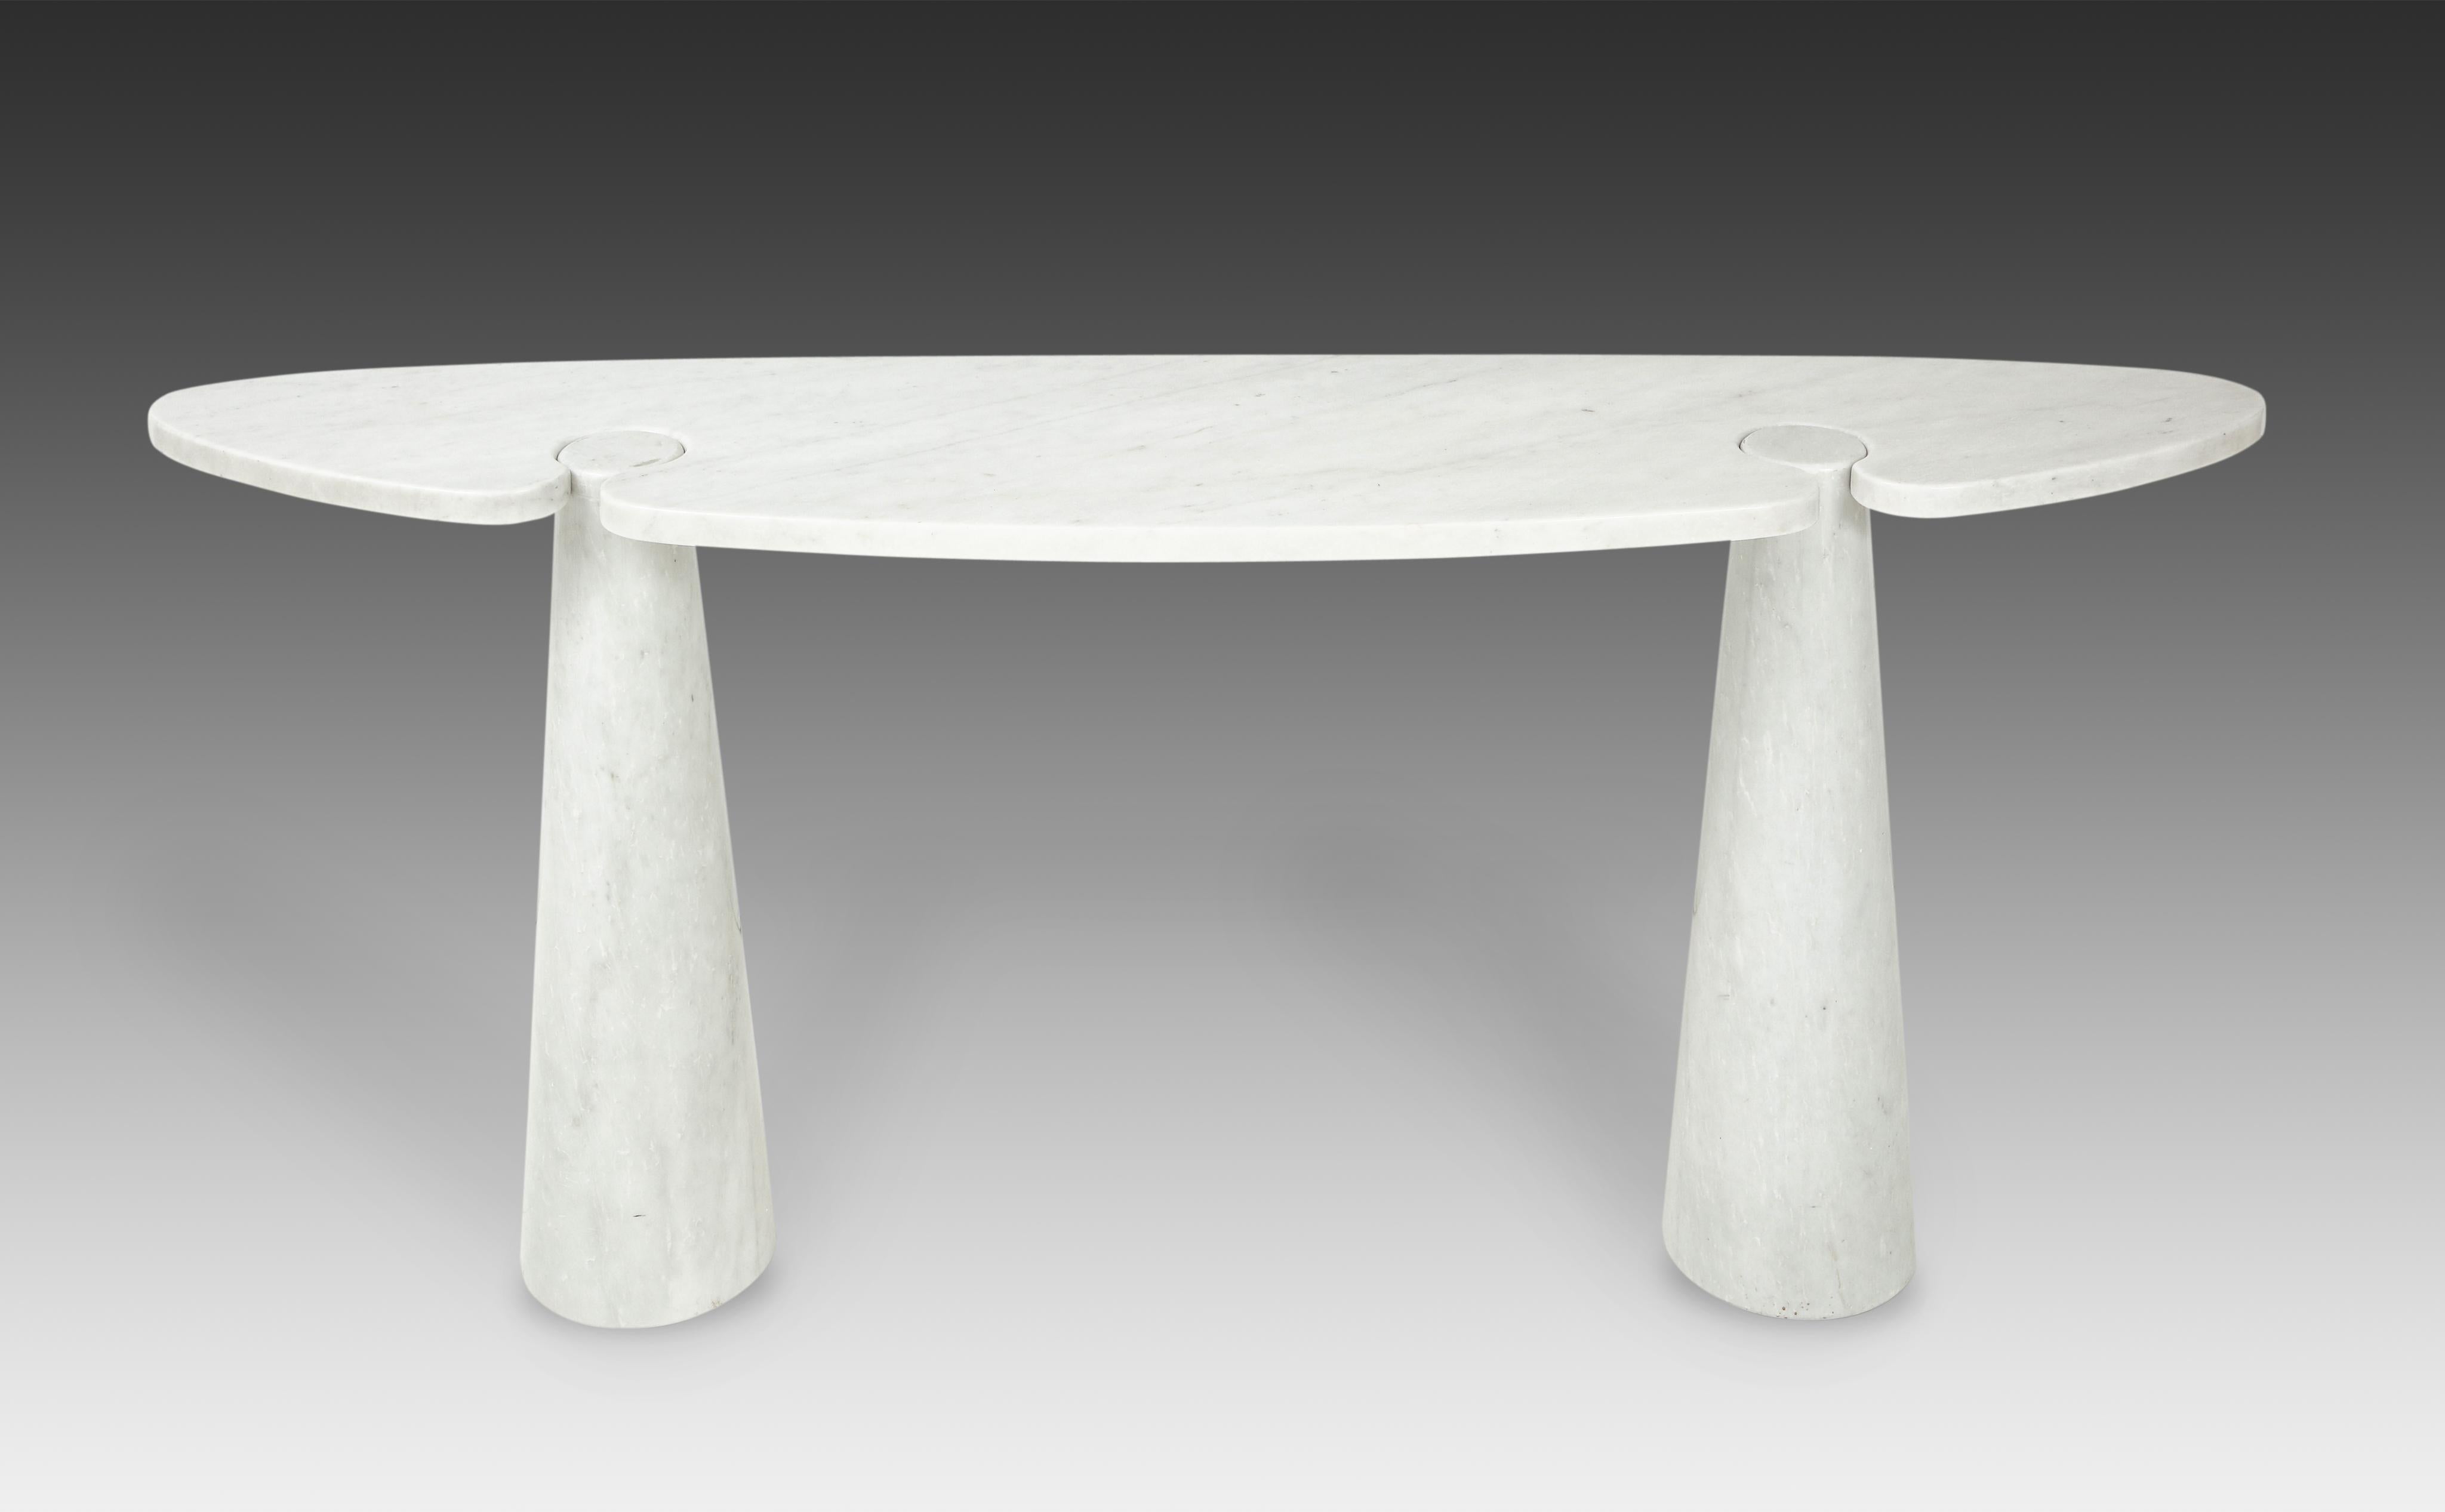 Designed by Angelo Mangiarotti for Skipper from the 'Eros' series, Carrara marble console with top fitted on two conical bases, Italy, 1971. Original skipper stickers on underside.

Given Mangiarotti's research on furniture without joints, this